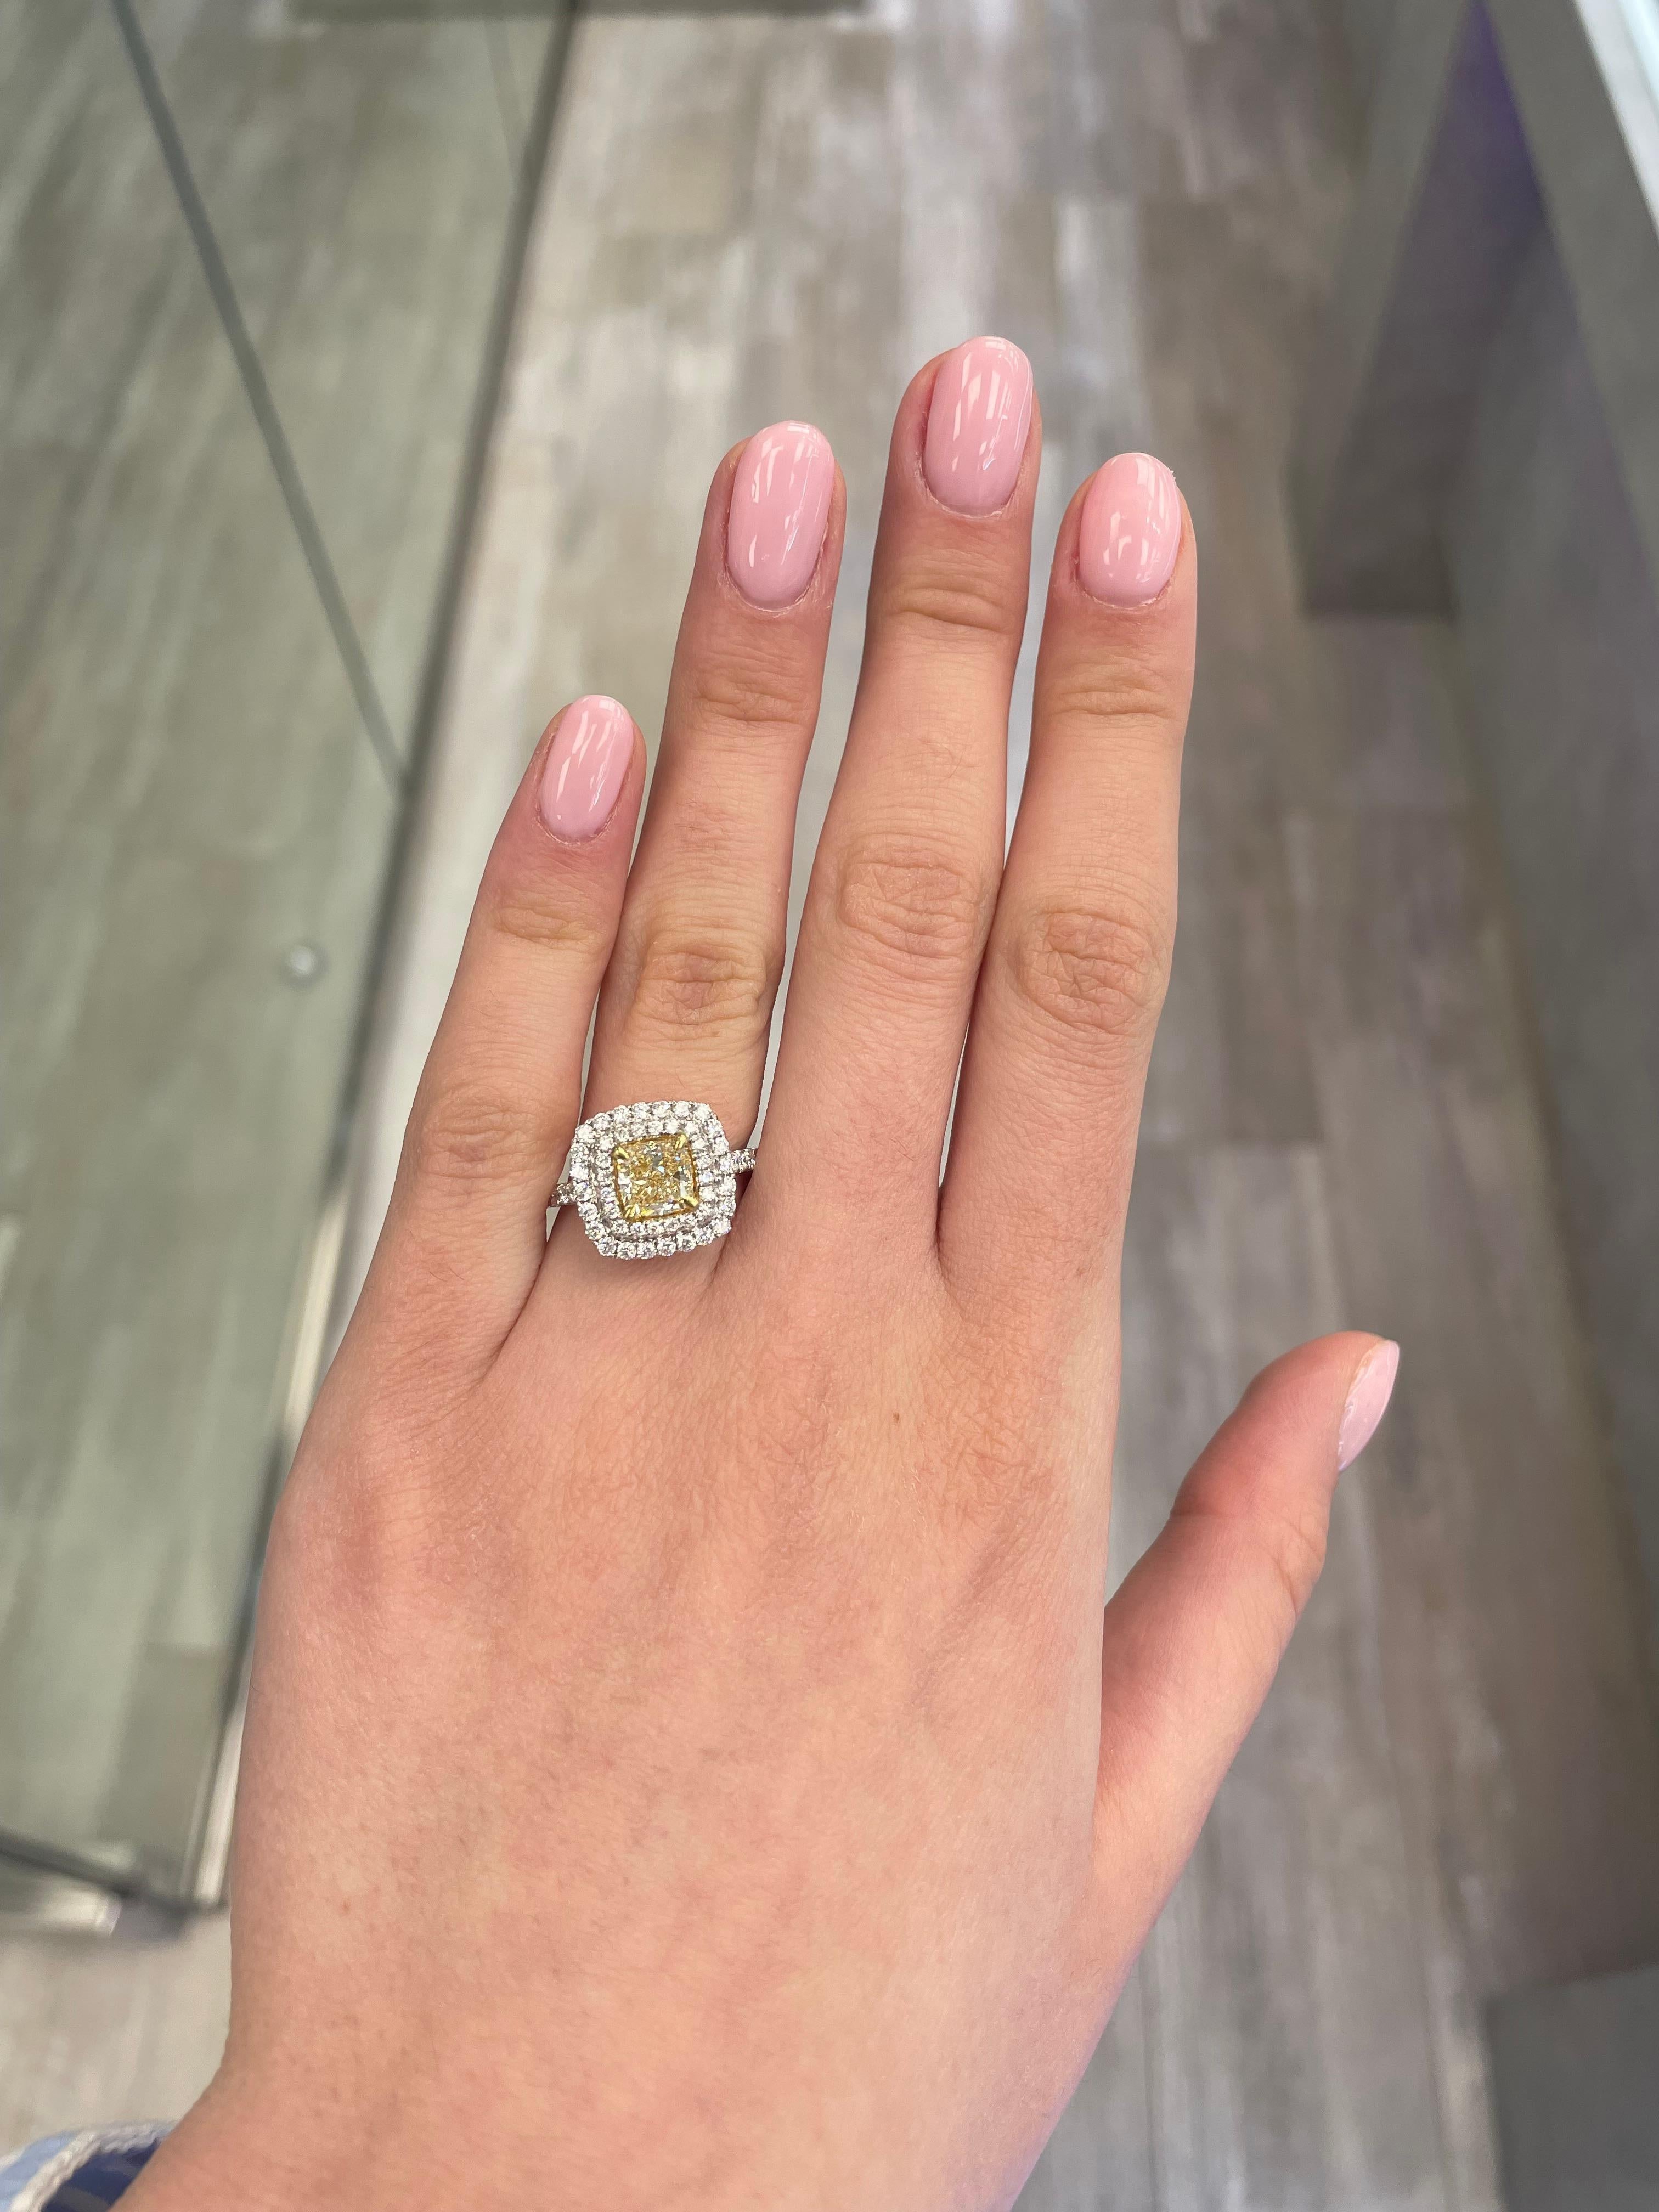 Stunning modern EGL certified yellow diamond double halo ring, two-tone 18k yellow and white gold. By Alexander Beverly Hills
2.10 carats total diamond weight.
1.33 carat cushion cut Fancy Intense Yellow color and VS2 clarity diamond, EGL graded in